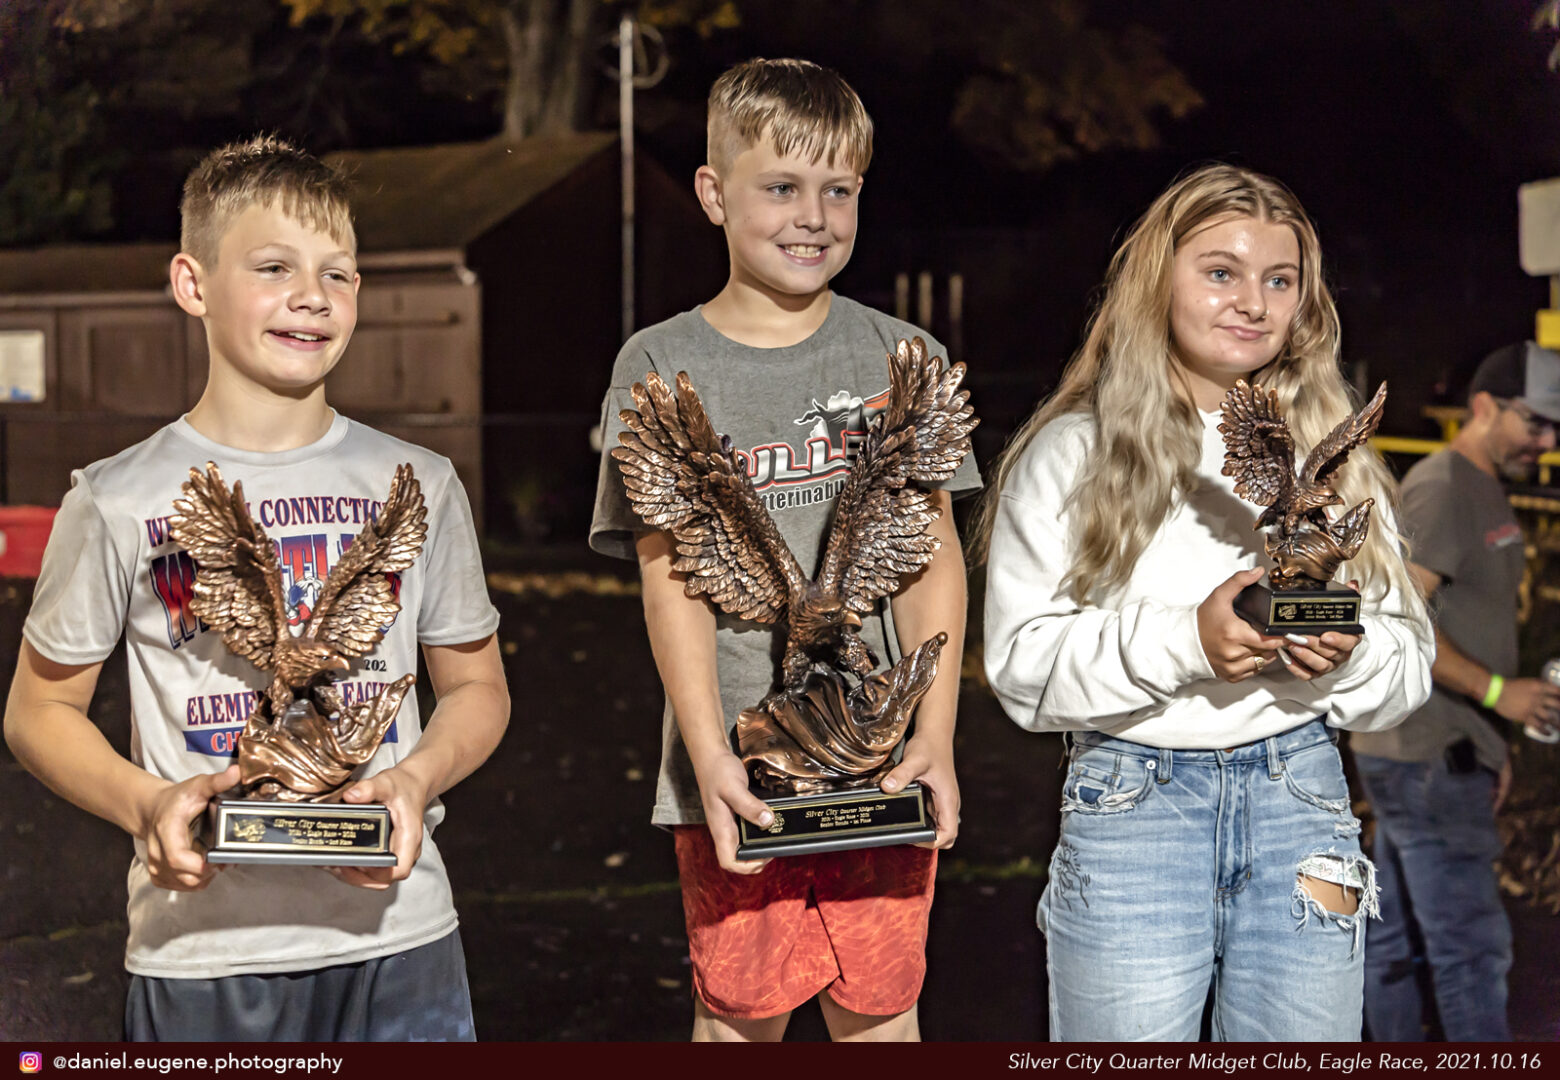 Two Boys and a Girl With Eagle Shaped Trophies